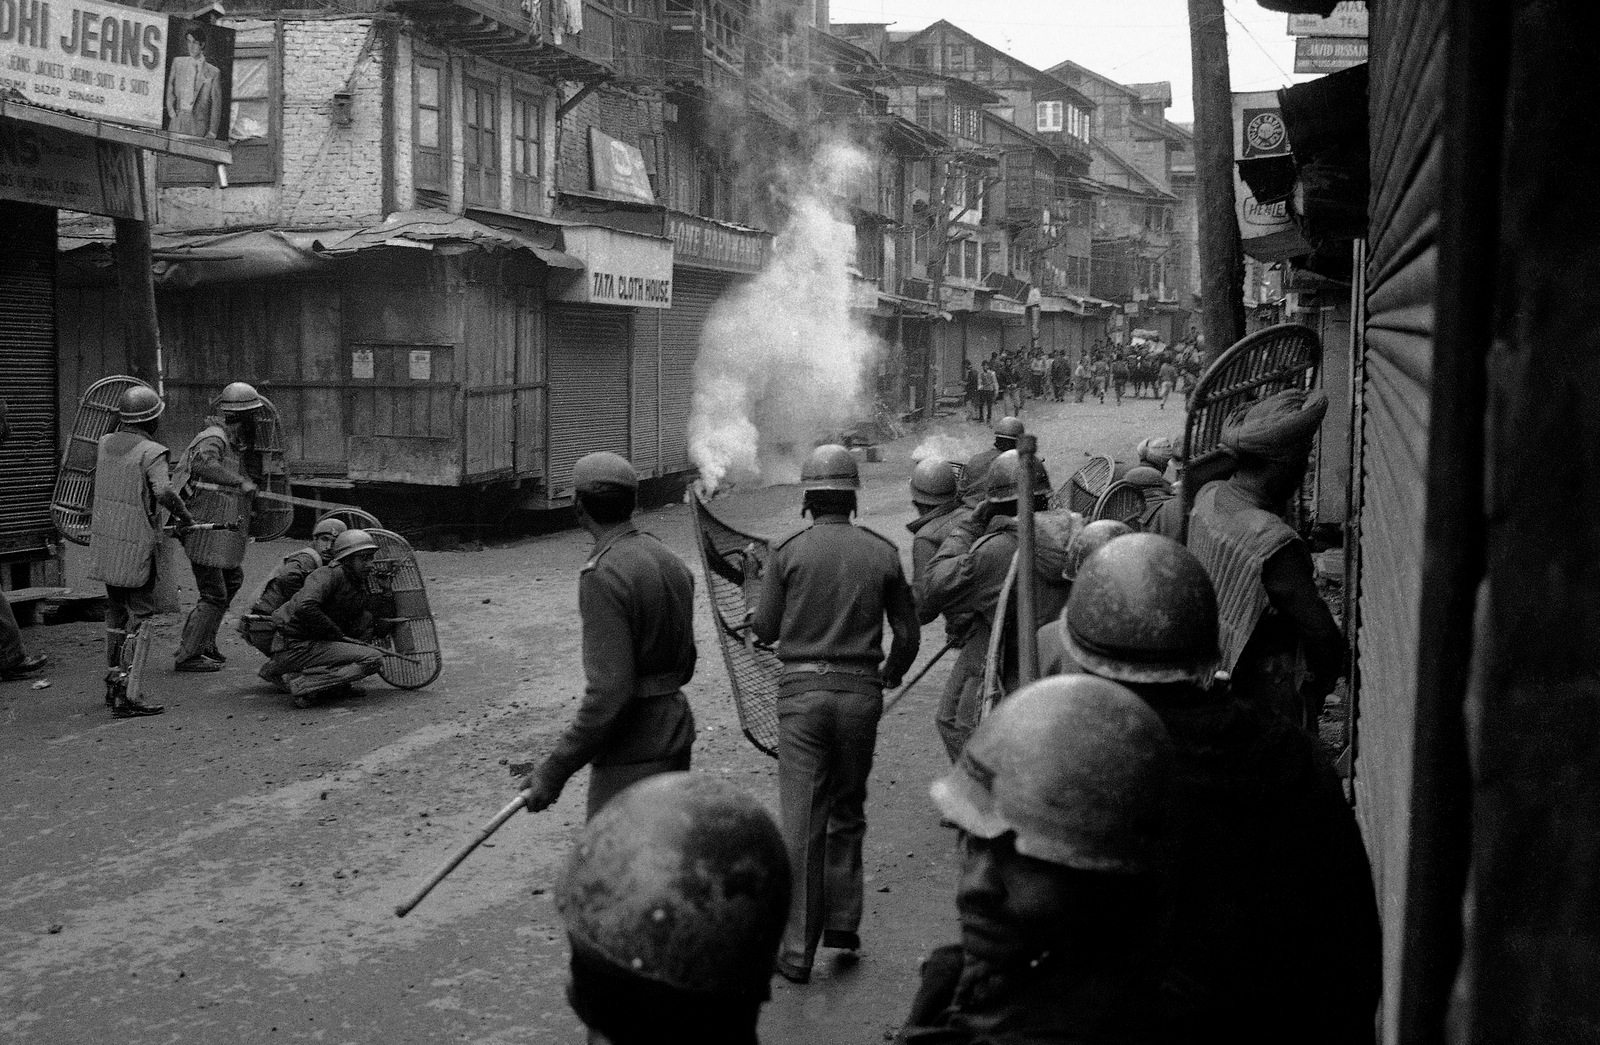 Indian security forces fire tear gas into a crowd of Kashmiri protesters, Feb. 6, 1990 in Srinagar, Kashmir. (AP Photo)